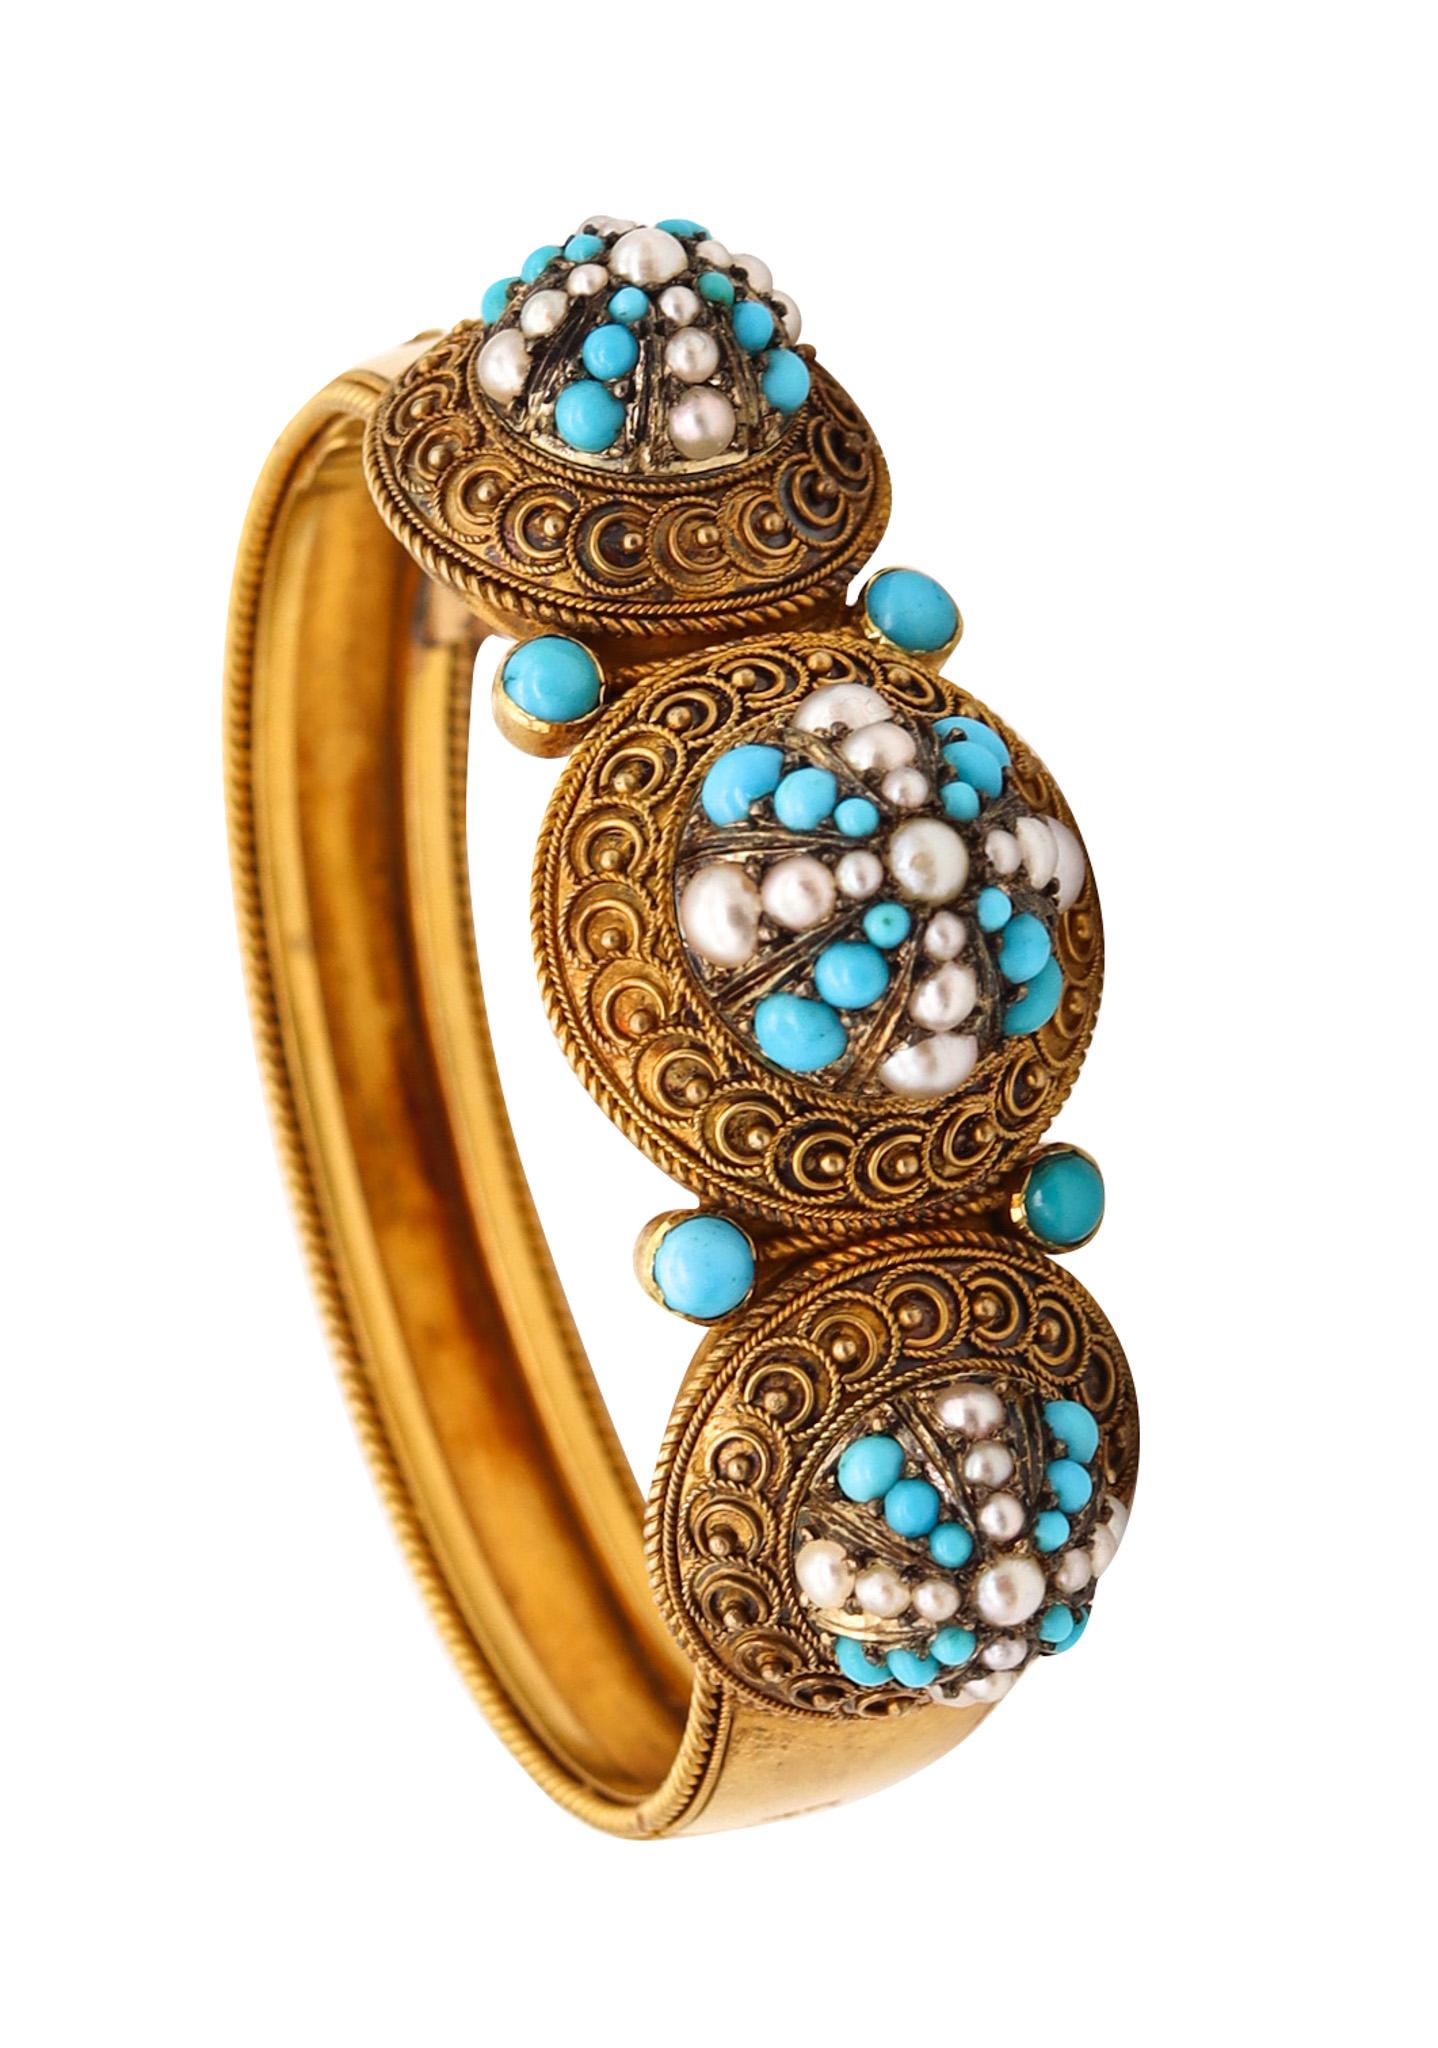 Victorian 1880 Etruscan Revival Bracelet in 15kt Gold with Turquoises and Pearls For Sale